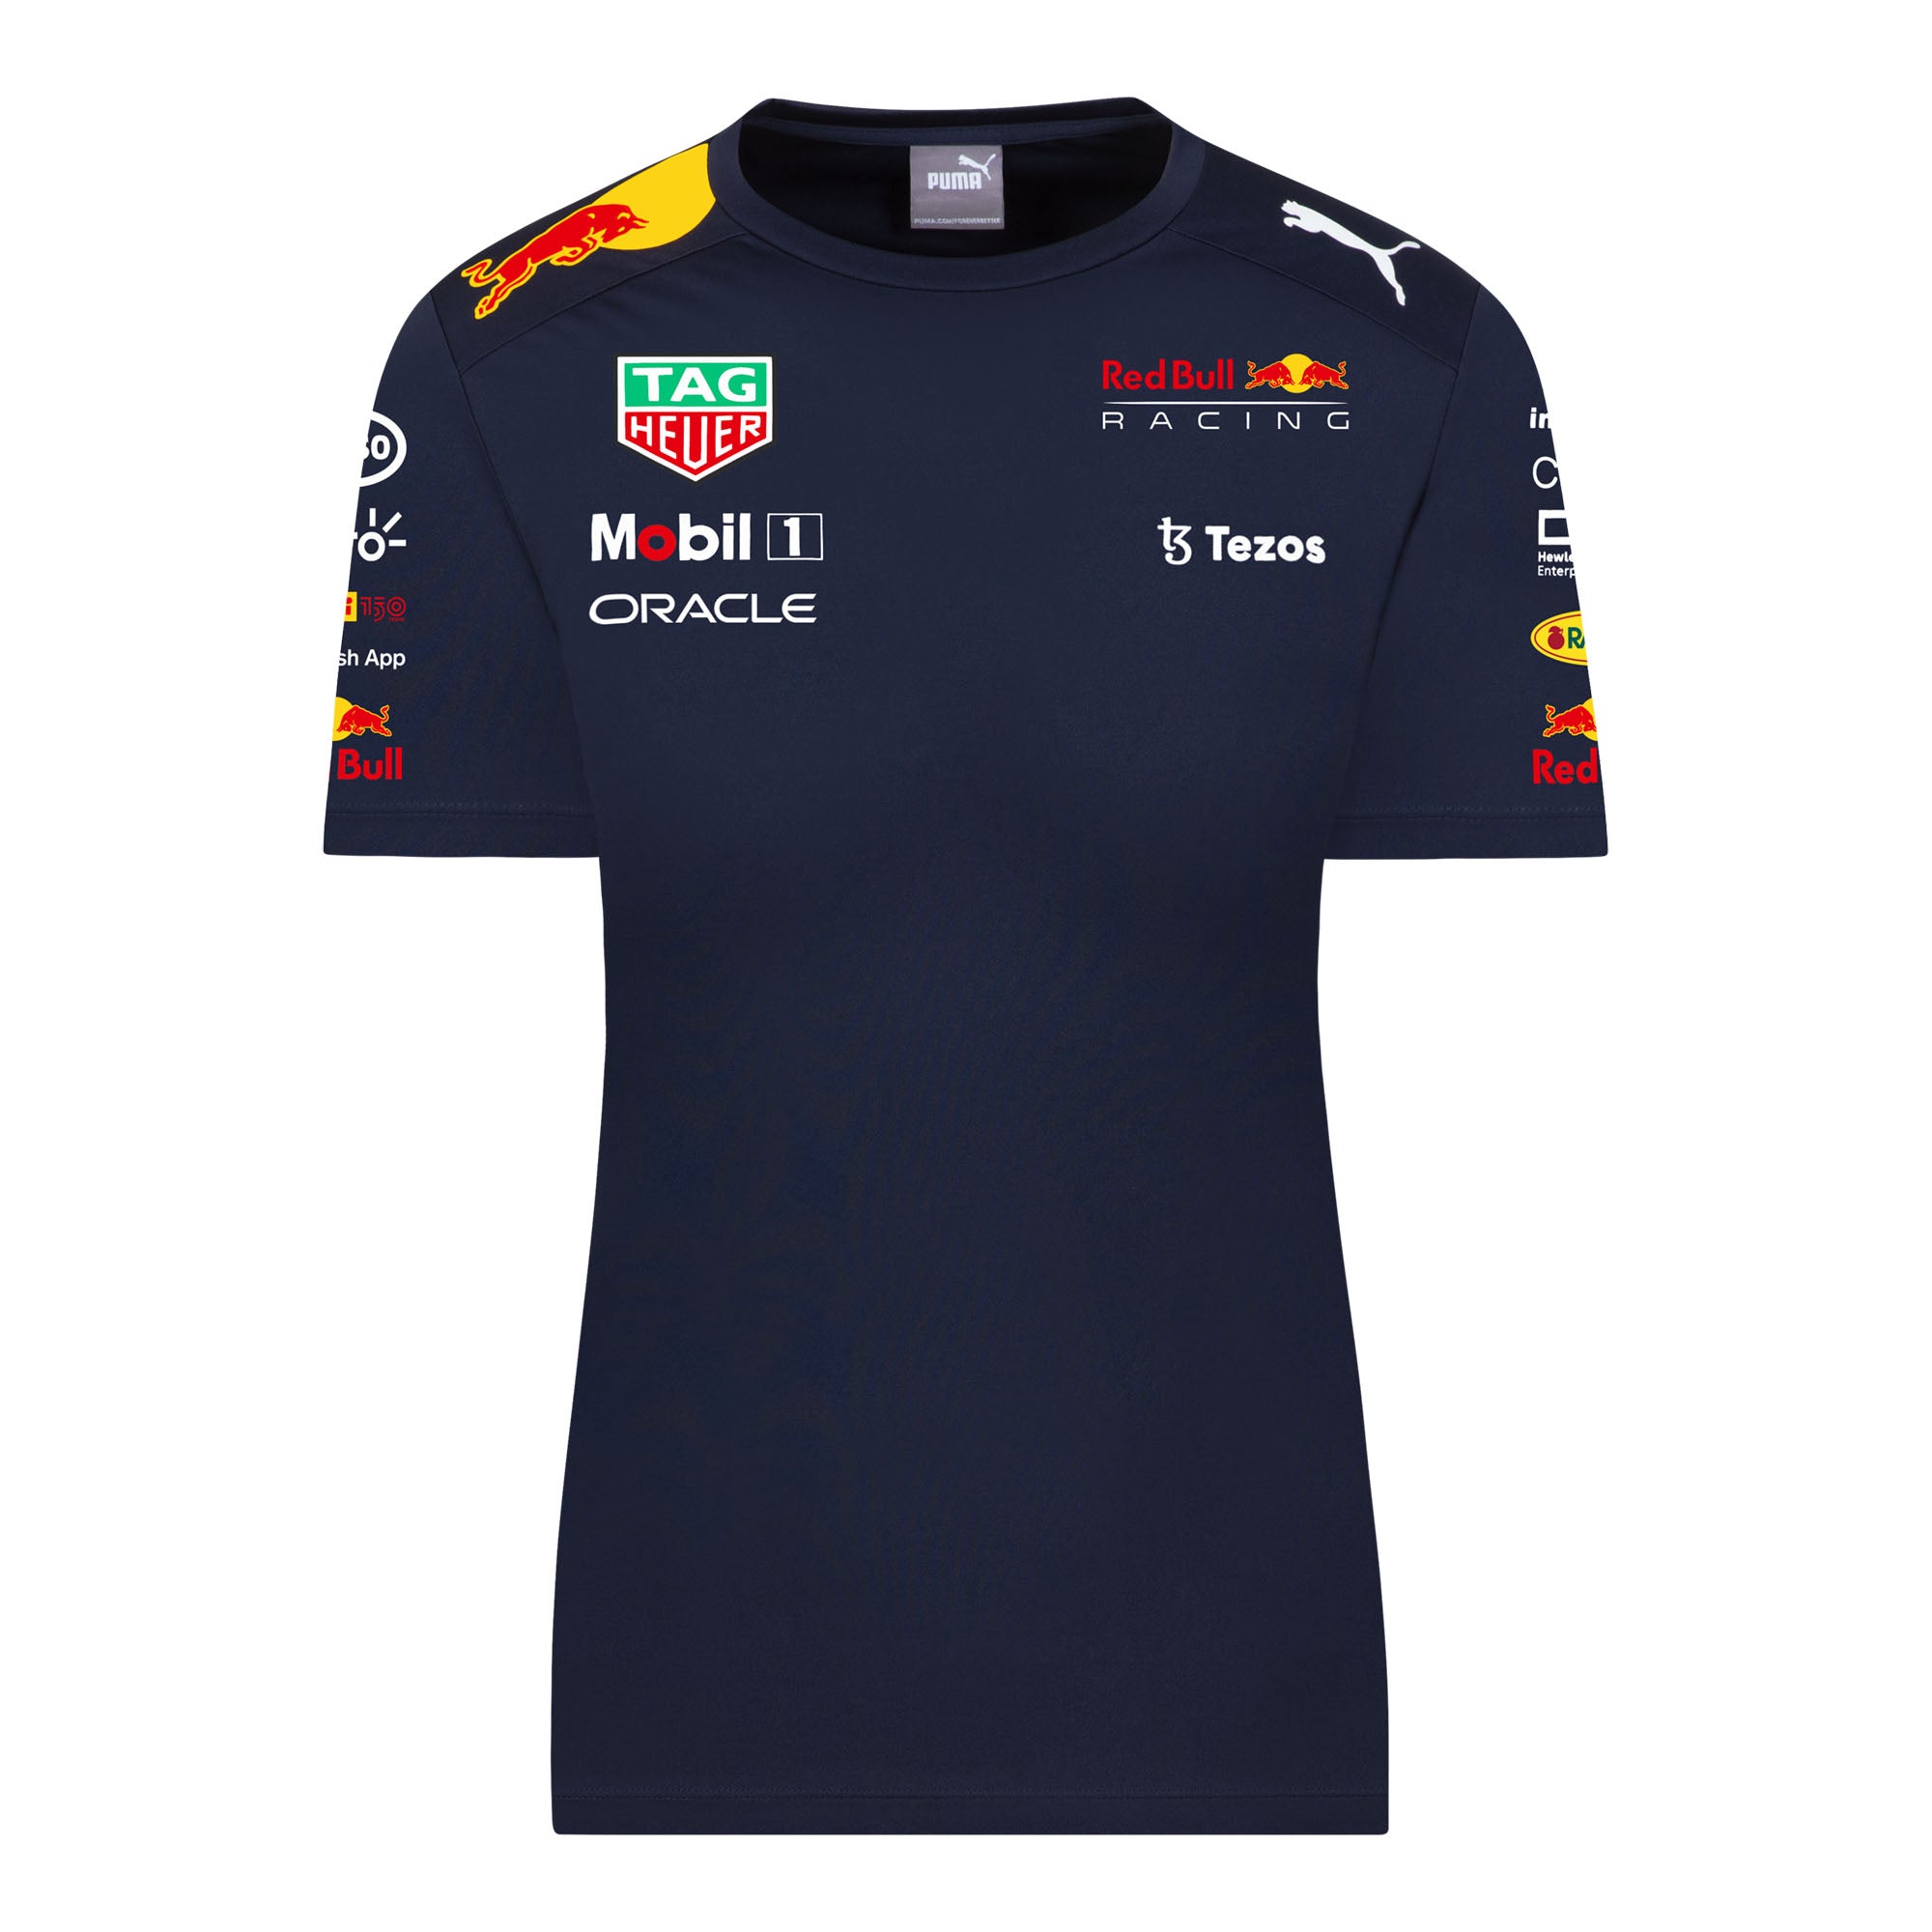 Red Bull Racing shop, 100% official RBR products